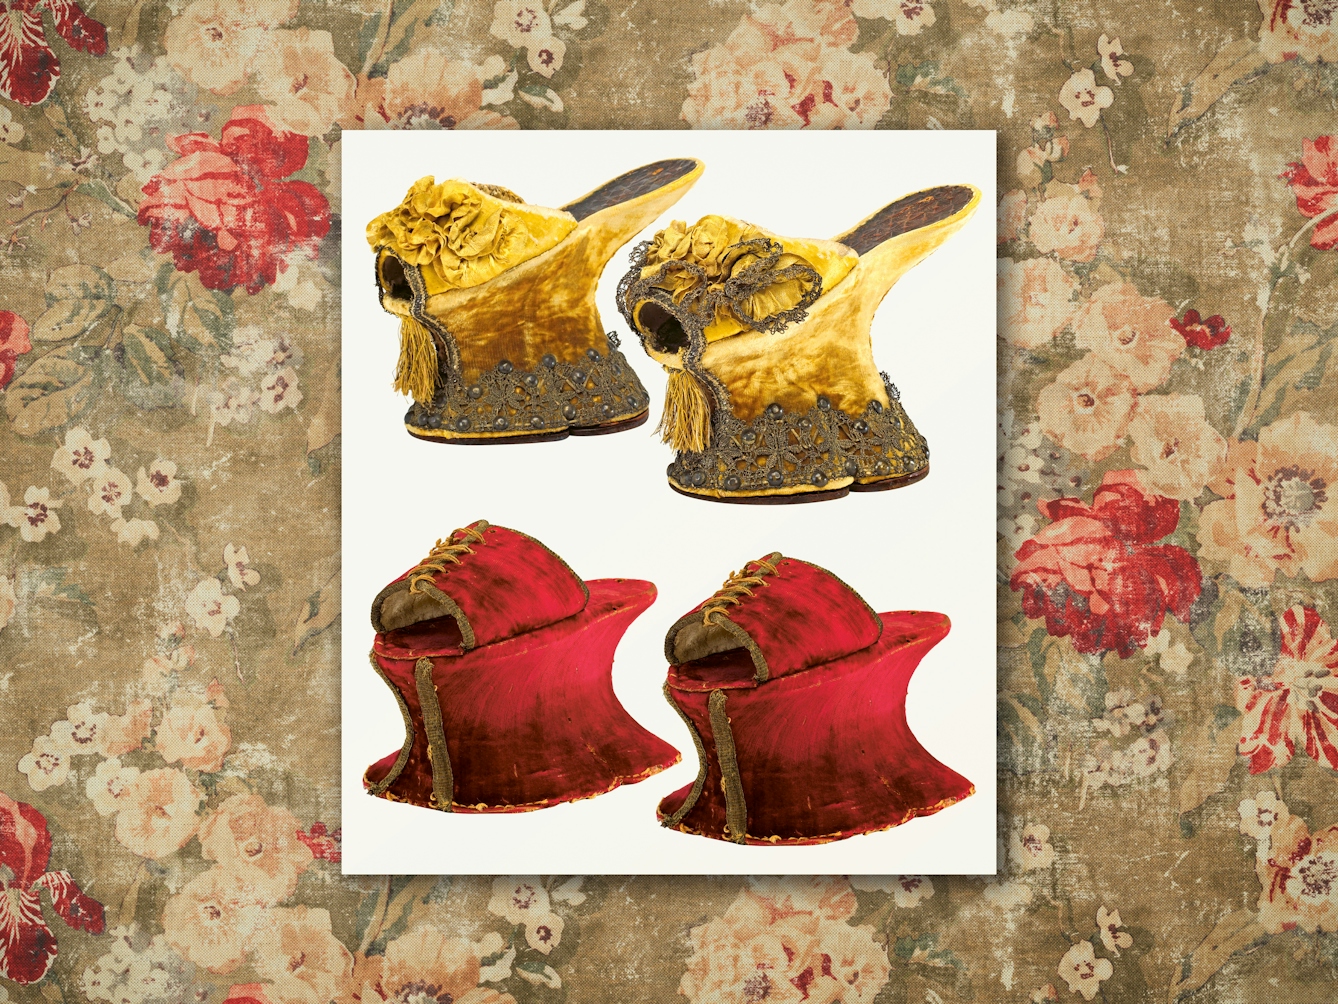 Digital composite image showing a floral renaissance worn fabric background. Resting on top of the background is a print of 2 pairs of chopins against a white background. The top pair are gold and ornately embellished with flowers and tassels. The bottom pair are bright red and laced with gold thread.